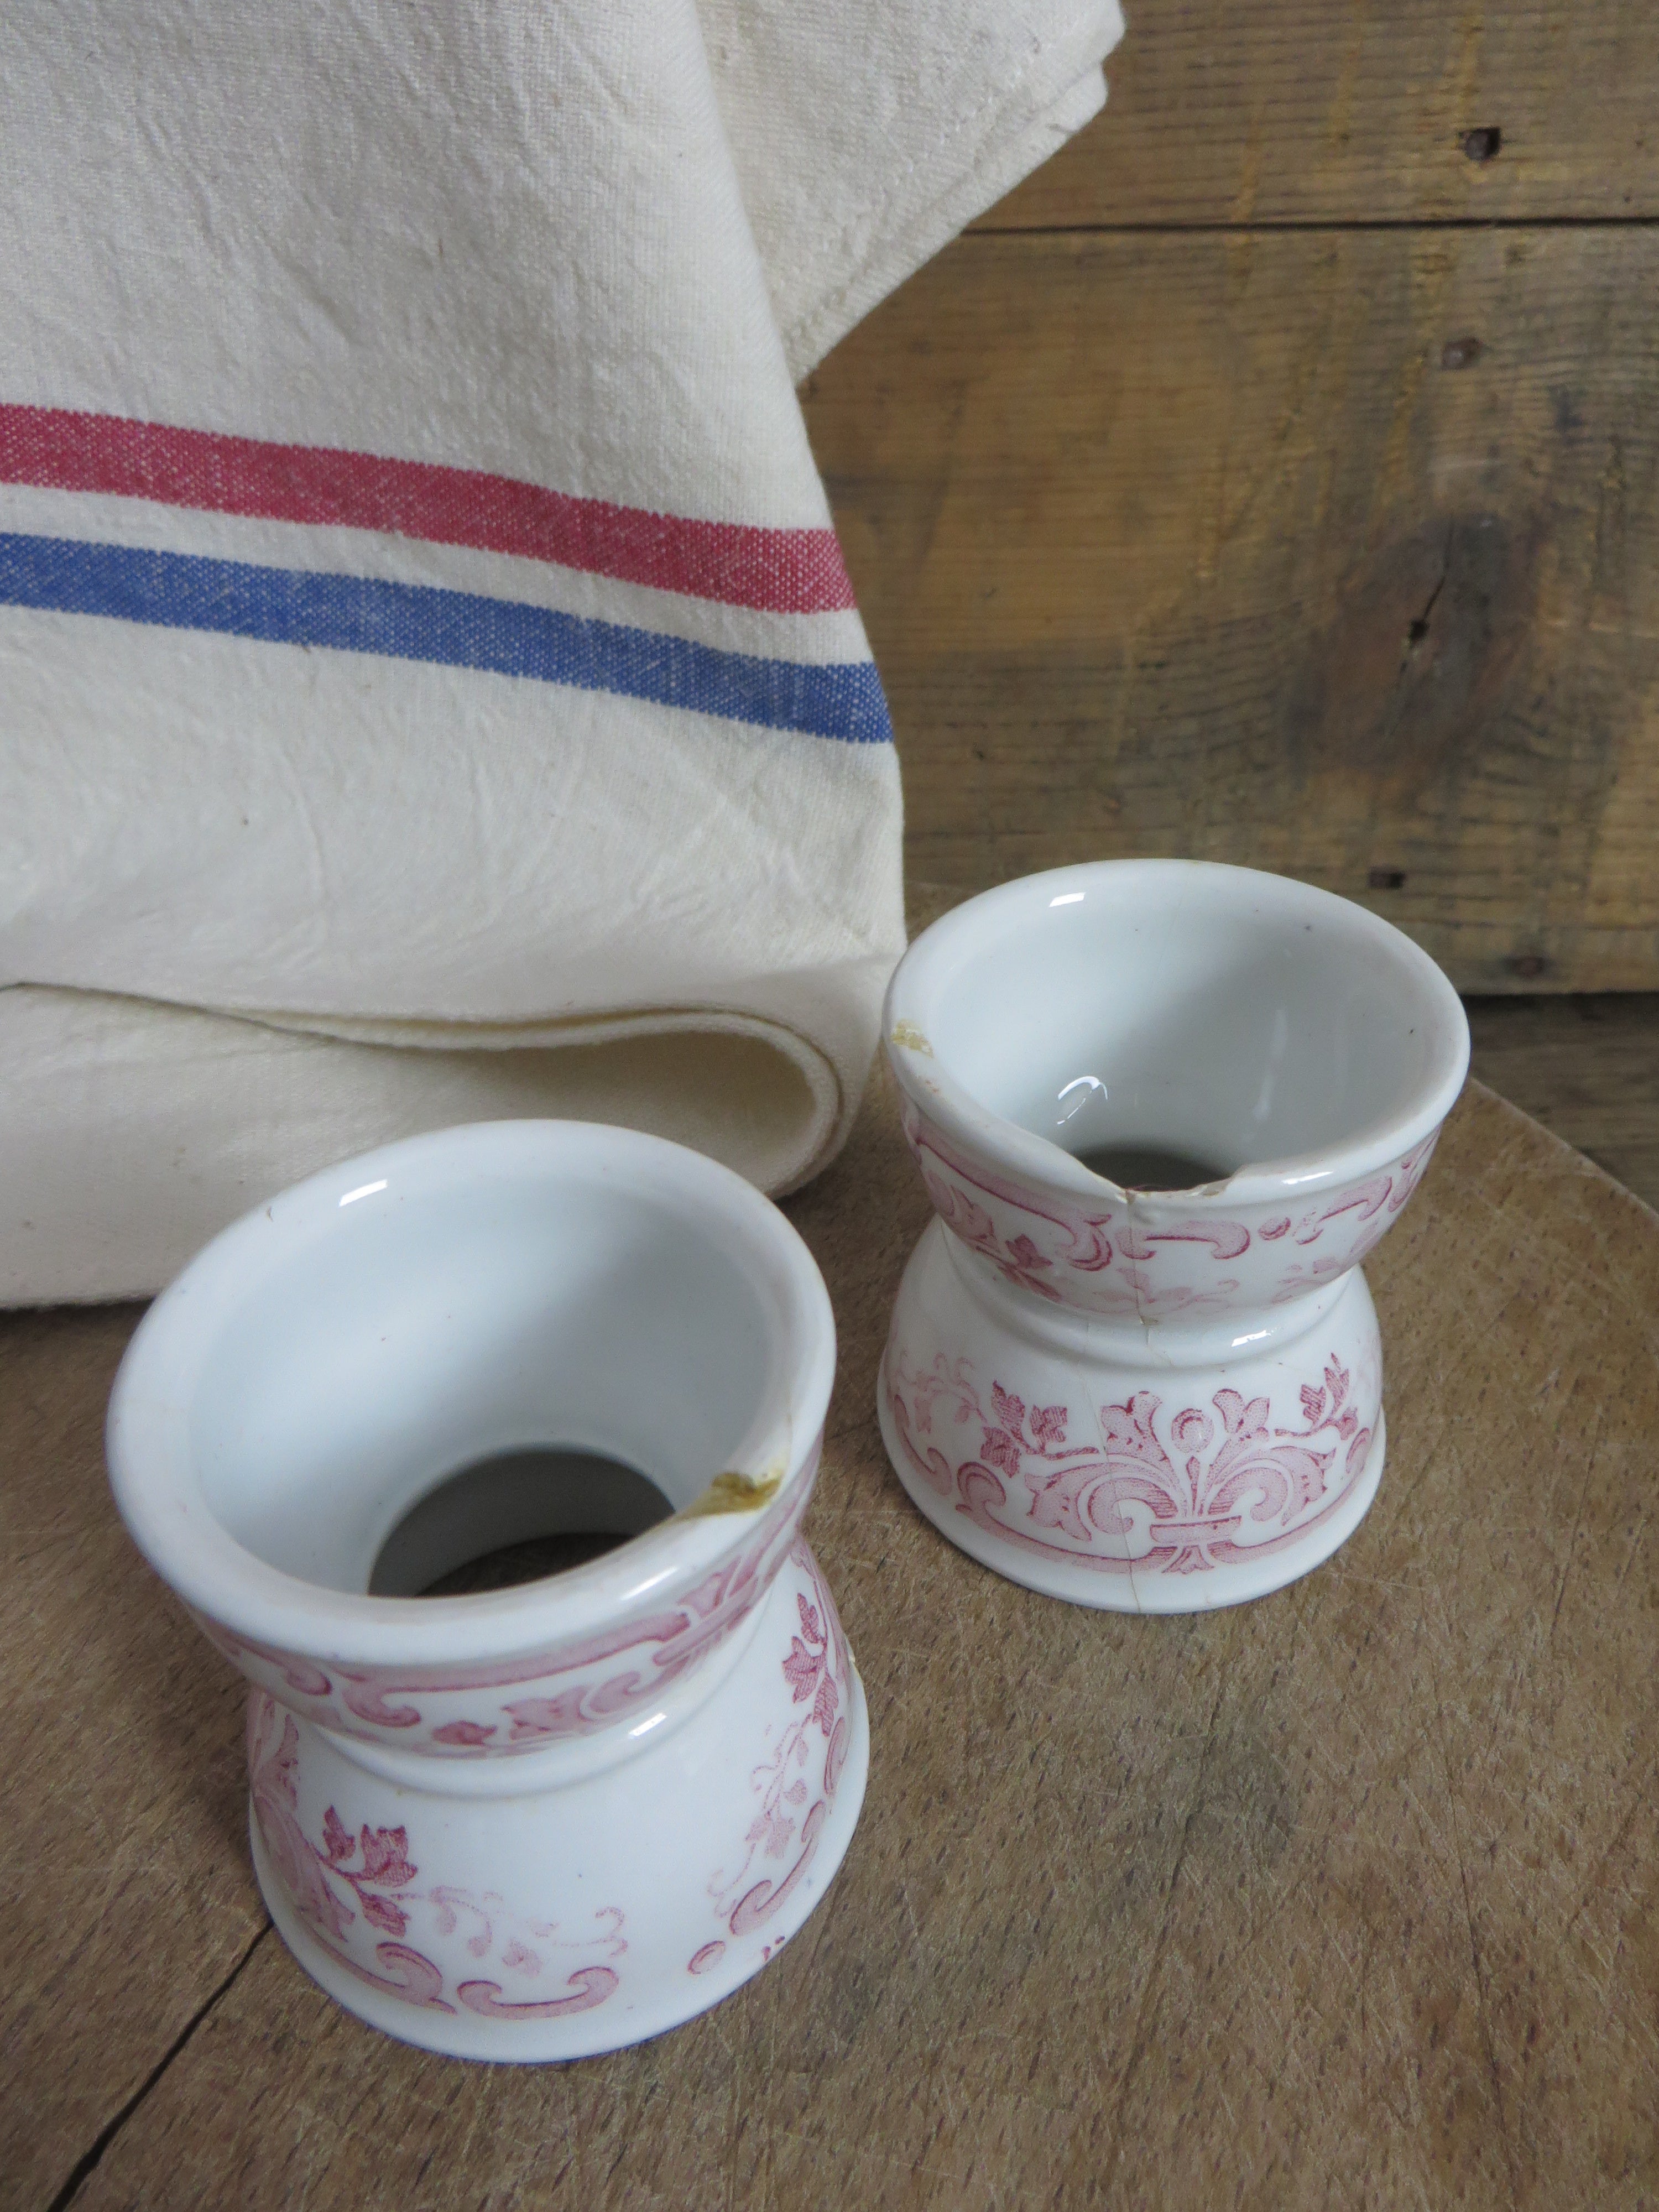 Patterned Egg Cups